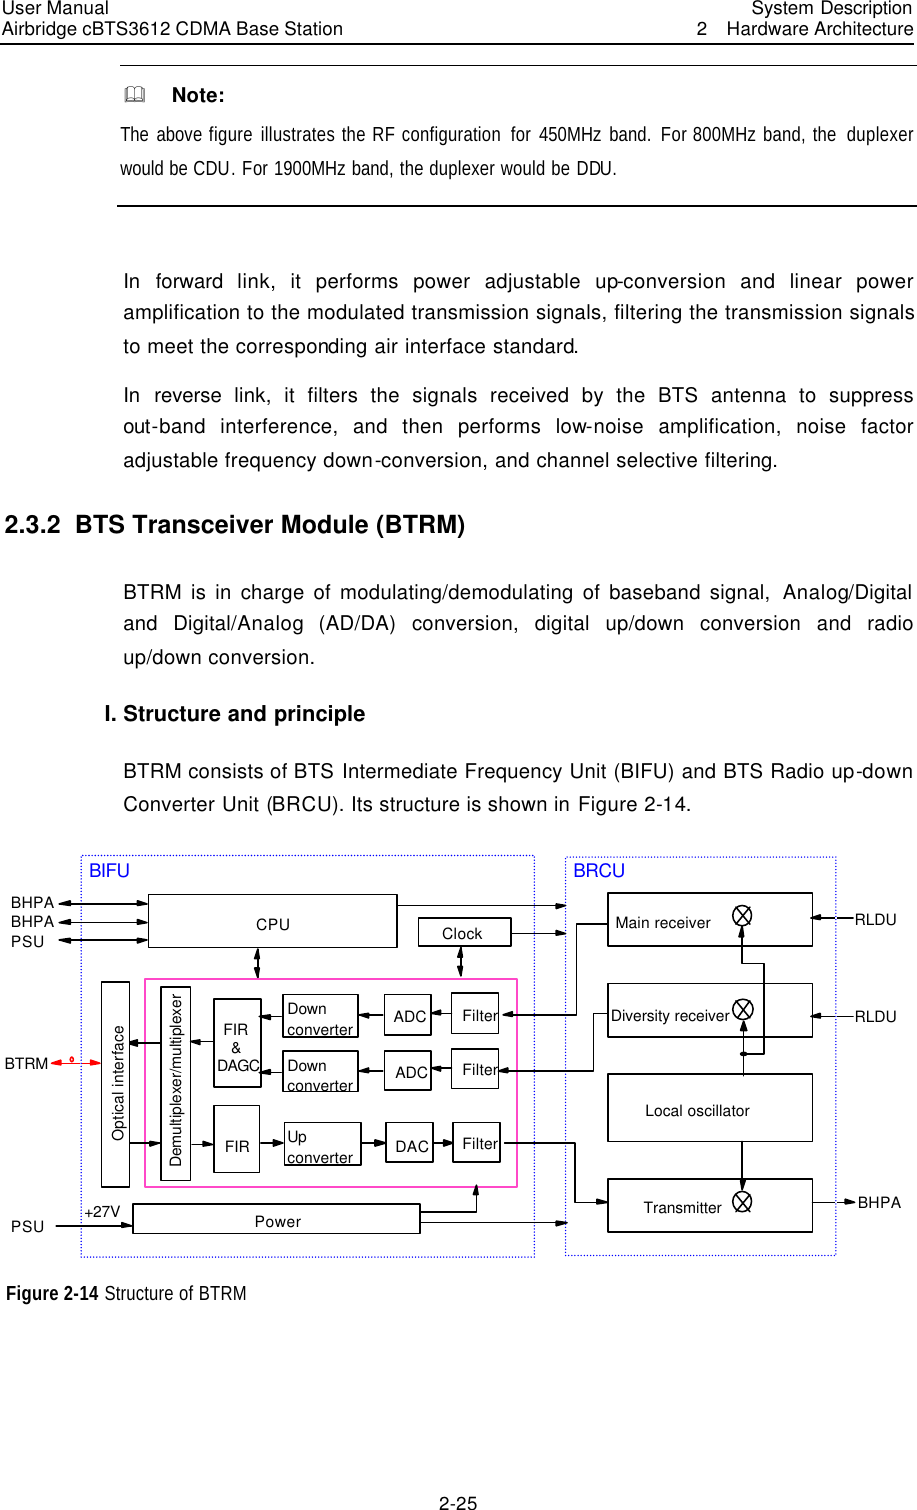 User Manual Airbridge cBTS3612 CDMA Base Station   System Description2  Hardware Architecture 2-25 &amp;  Note: The above figure illustrates the RF configuration for 450MHz band. For 800MHz band, the  duplexer would be CDU. For 1900MHz band, the duplexer would be DDU.    In forward link,  it performs power adjustable up-conversion and linear power amplification to the modulated transmission signals, filtering the transmission signals to meet the corresponding air interface standard.   In reverse link,  it filters the signals received by the BTS antenna to suppress out-band interference, and then performs low-noise amplification, noise factor adjustable frequency down-conversion, and channel selective filtering. 2.3.2  BTS Transceiver Module (BTRM) BTRM is in charge of modulating/demodulating of baseband signal, Analog/Digital and  Digital/Analog (AD/DA) conversion, digital up/down conversion and radio up/down conversion.   I. Structure and principle BTRM consists of BTS Intermediate Frequency Unit (BIFU) and BTS Radio up-down Converter Unit (BRCU). Its structure is shown in Figure 2-14. FIR  &amp;DAGCFIR DACDemultiplexer/multiplexerADCPowerCPU Clock Optical interfaceDownconverter ADC FilterBHPALocal oscillatorBRCURLDUBIFURLDUBTRM+27VMain receiverDiversity receiverTransmitterBHPA   PSUPSUBHPAFilterFilterDownconverterUpconverter Figure 2-14 Structure of BTRM 